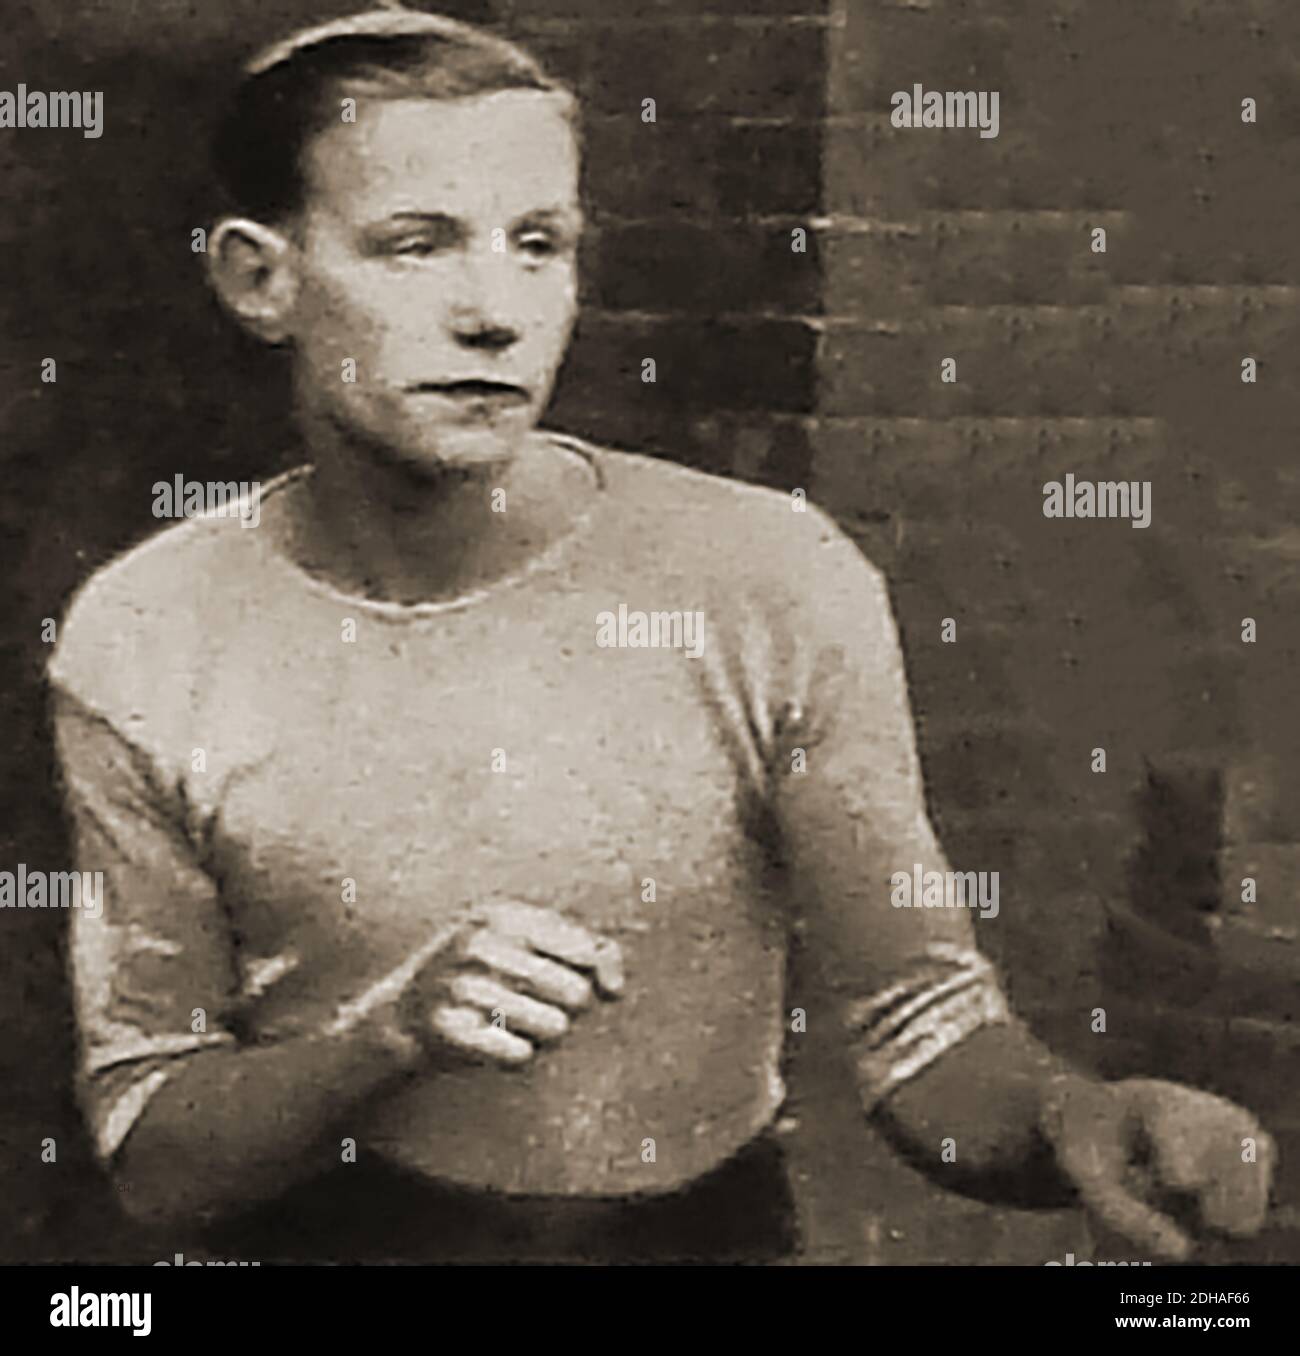 An old portrait of Jimmy Wilde, British Flyweight Boxing Champion of the World. ---- William James Wilde (1892 –1969) was a Welsh professional boxer who competed from 1911 to 1923. Titles included  1916 IBU world flyweight title;  EBU European flyweight title (twice) 1914/16/17 ;  BBB of C British flyweight title in 1916 and  National Sporting Club’s British flyweight title from 1916 to 1918. He was regarded by some as the greatest British fighter of all time because he could beat bantamweights and  featherweights, and   has the longest recorded unbeaten streak in boxing history. Stock Photo